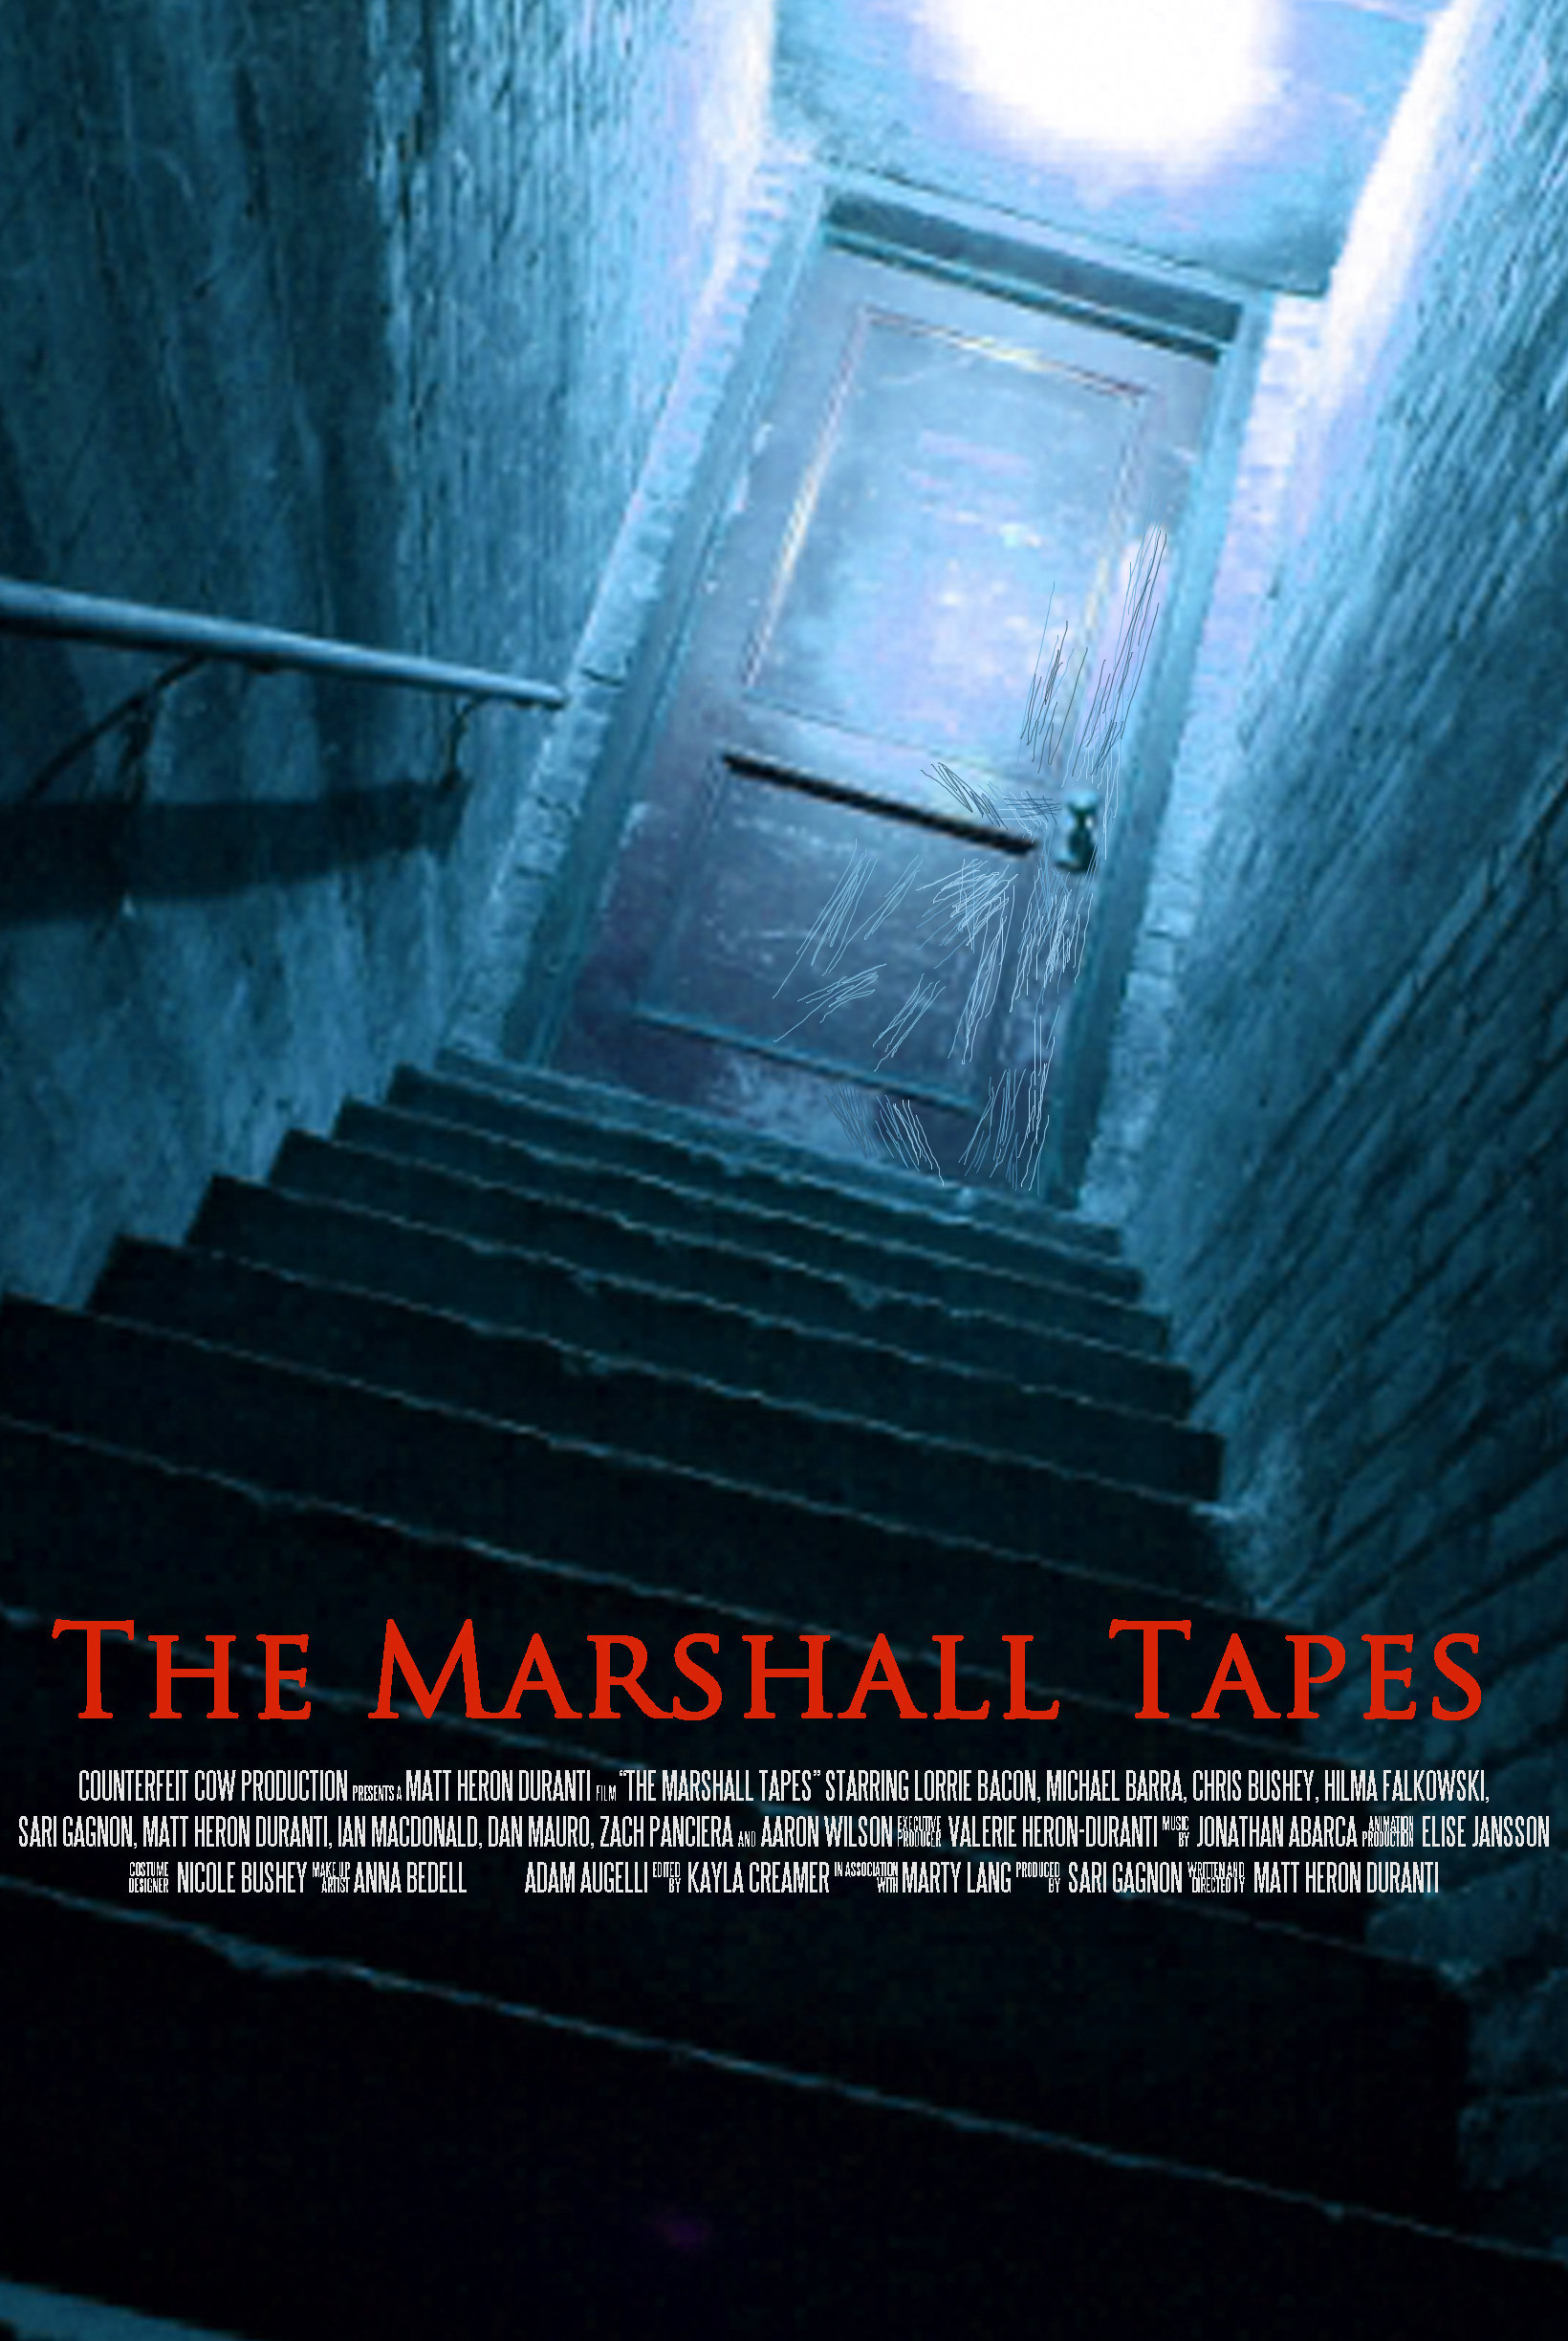 Poster for the film, The Marshall Tapes.